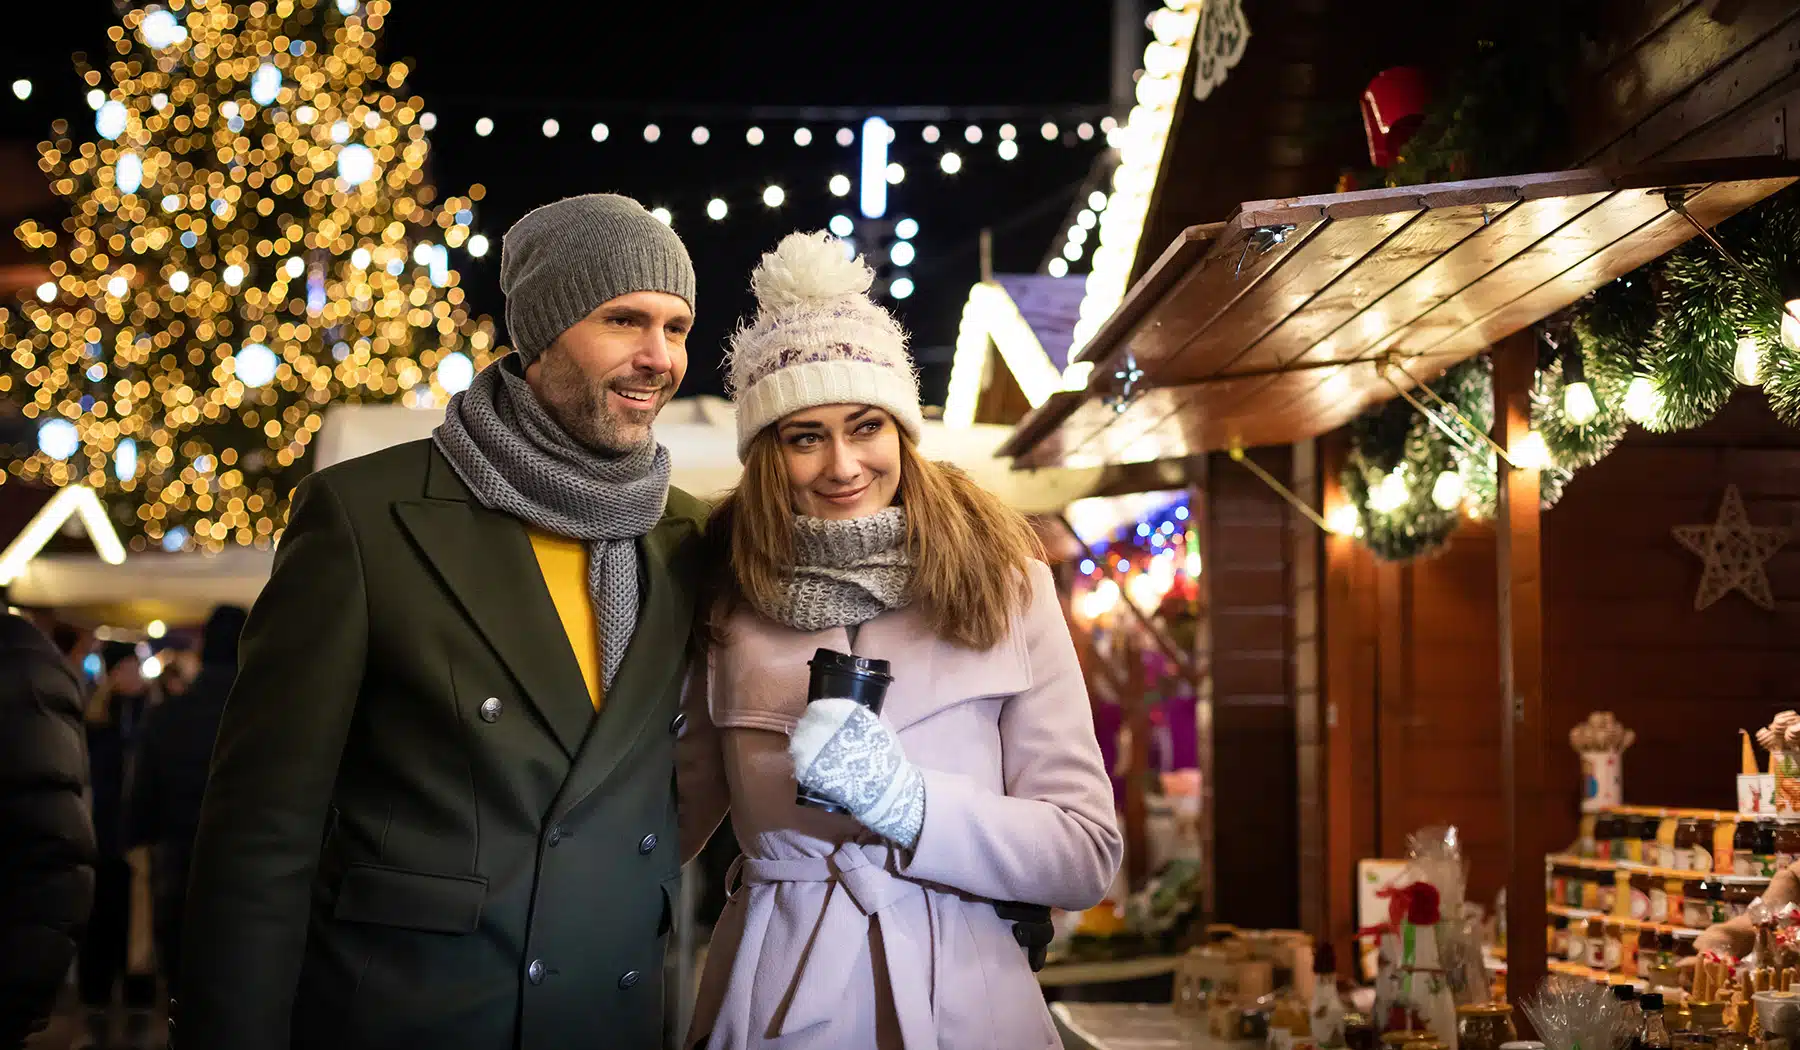 Loving couple visits the decorated Christmas market during the evening